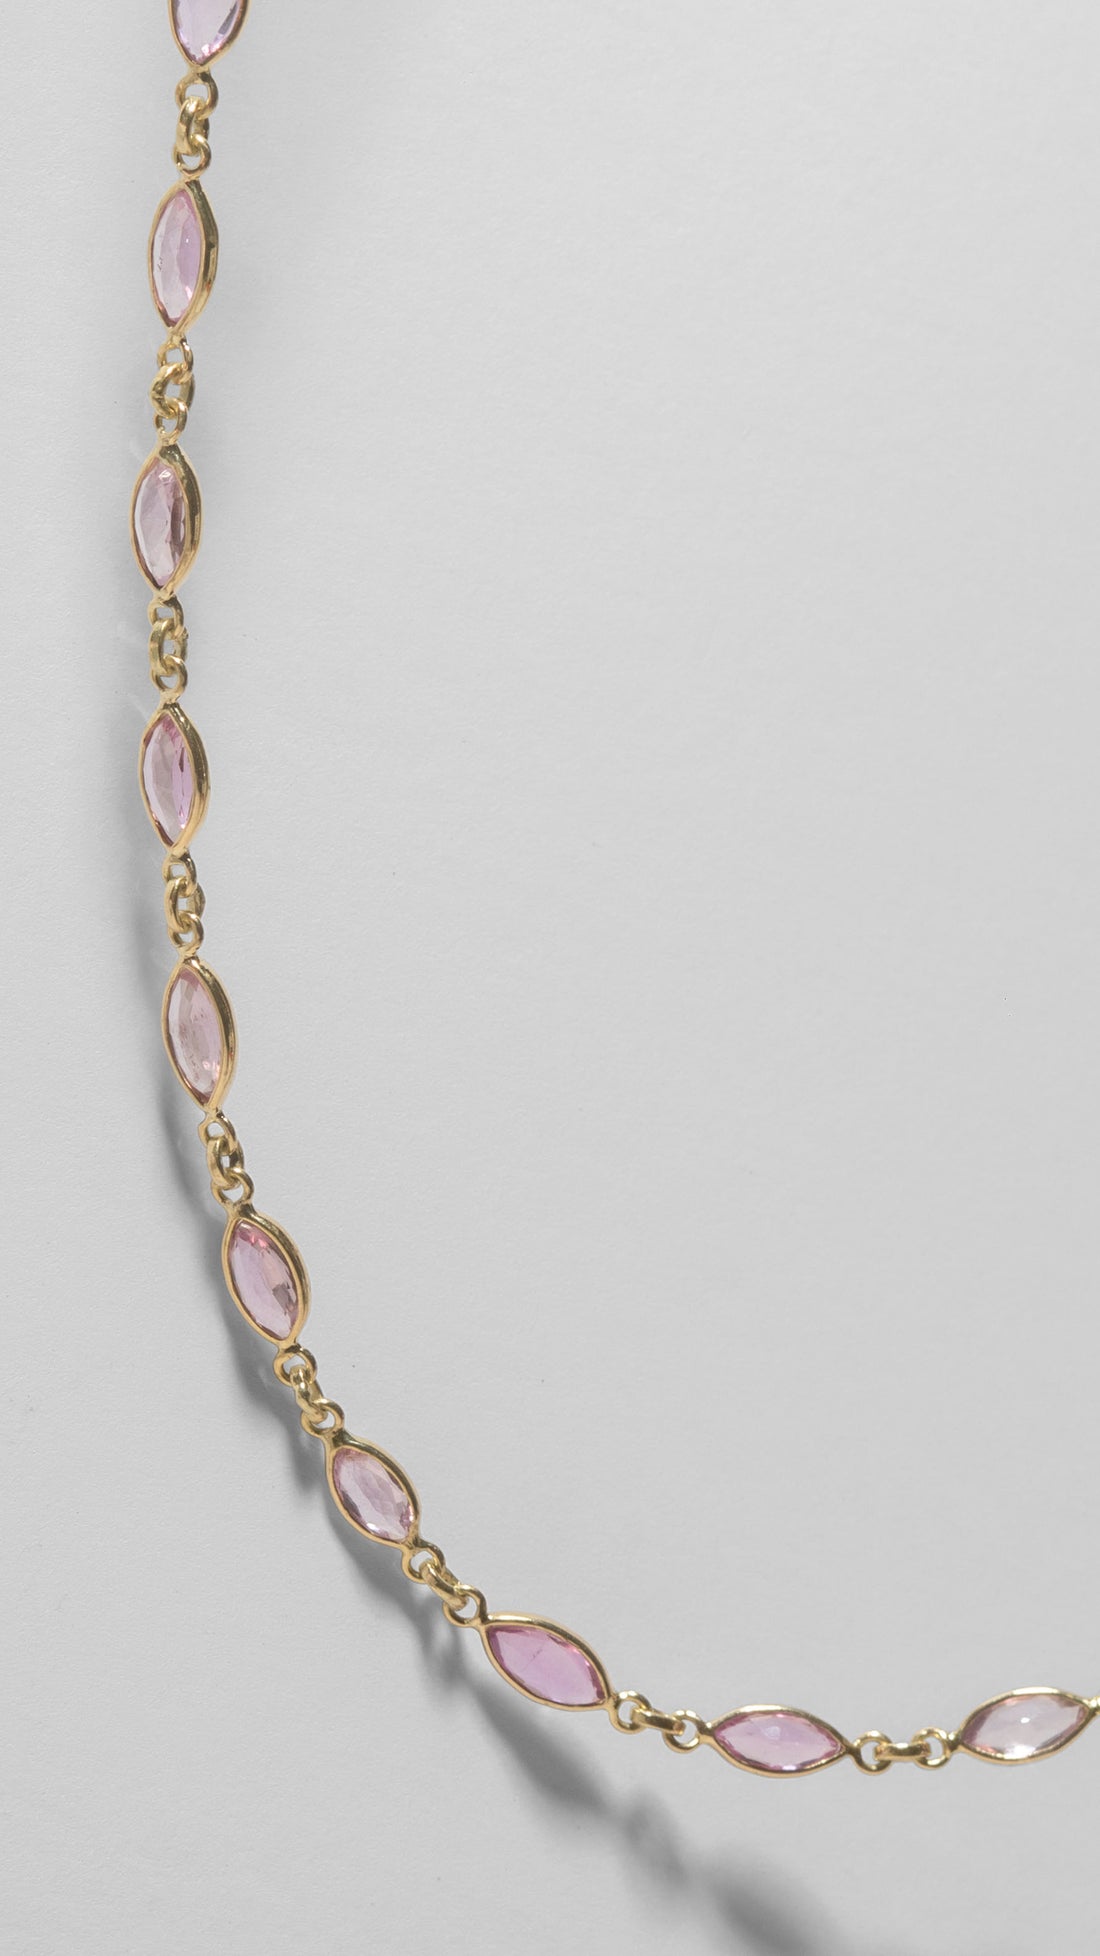 ILA SODHANI Camellia Necklace shown in a close shot of the marquise cut natural pink sapphires set in yellow gold on a white background.